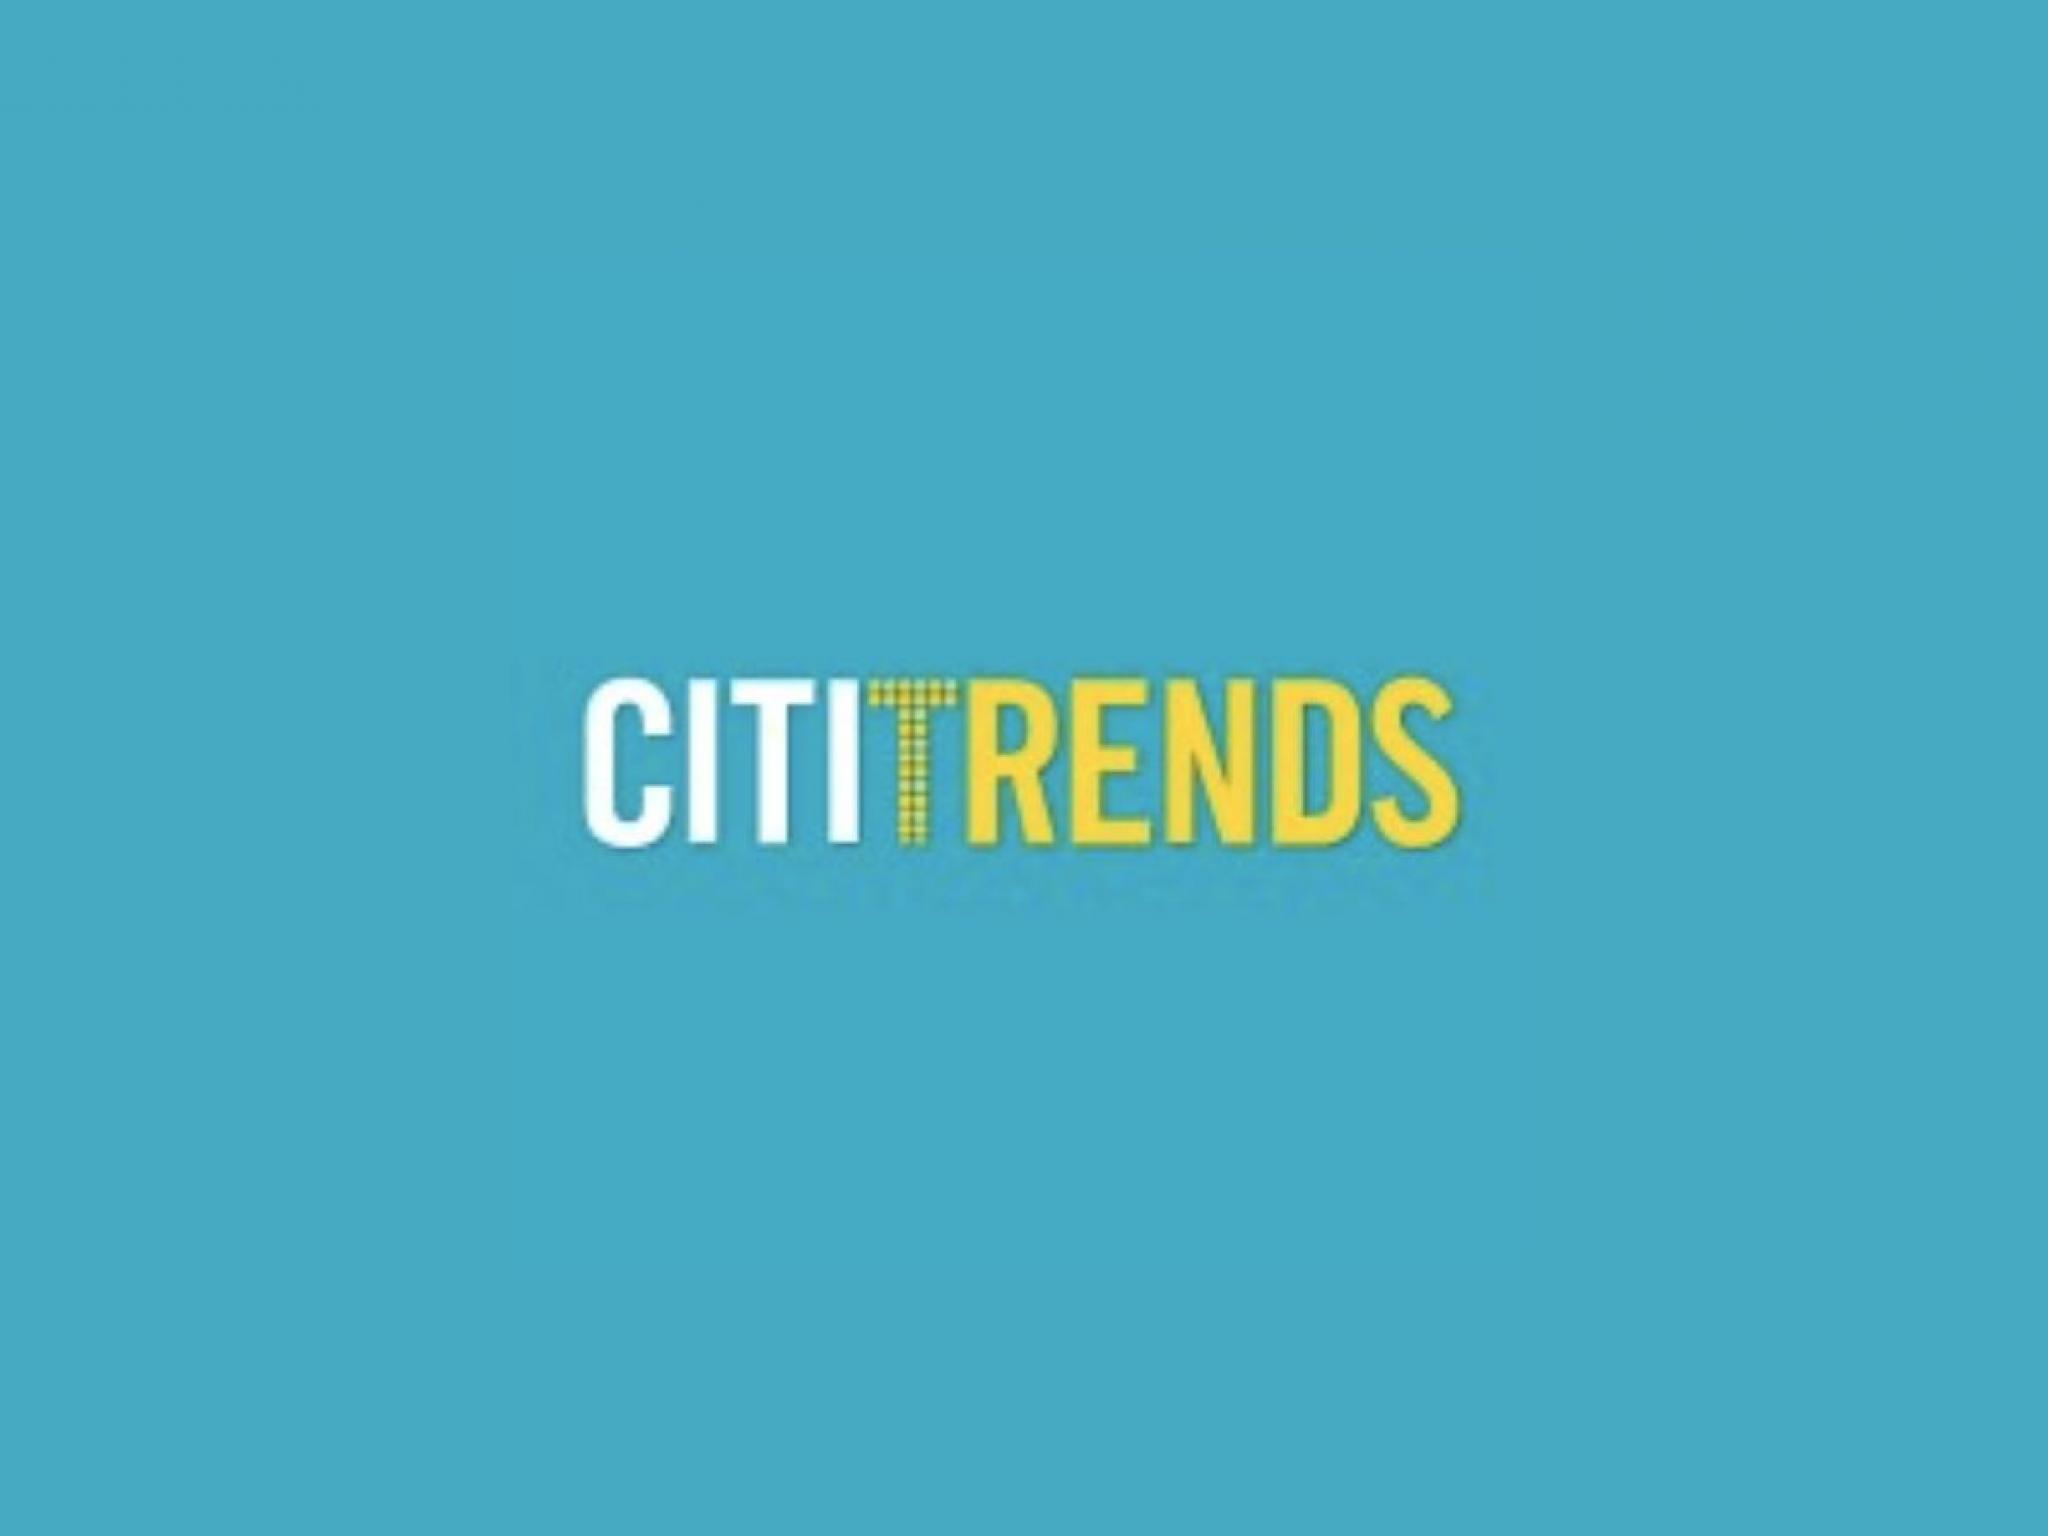  over-4m-bet-on-citi-trends-check-out-these-4-stocks-insiders-are-buying 